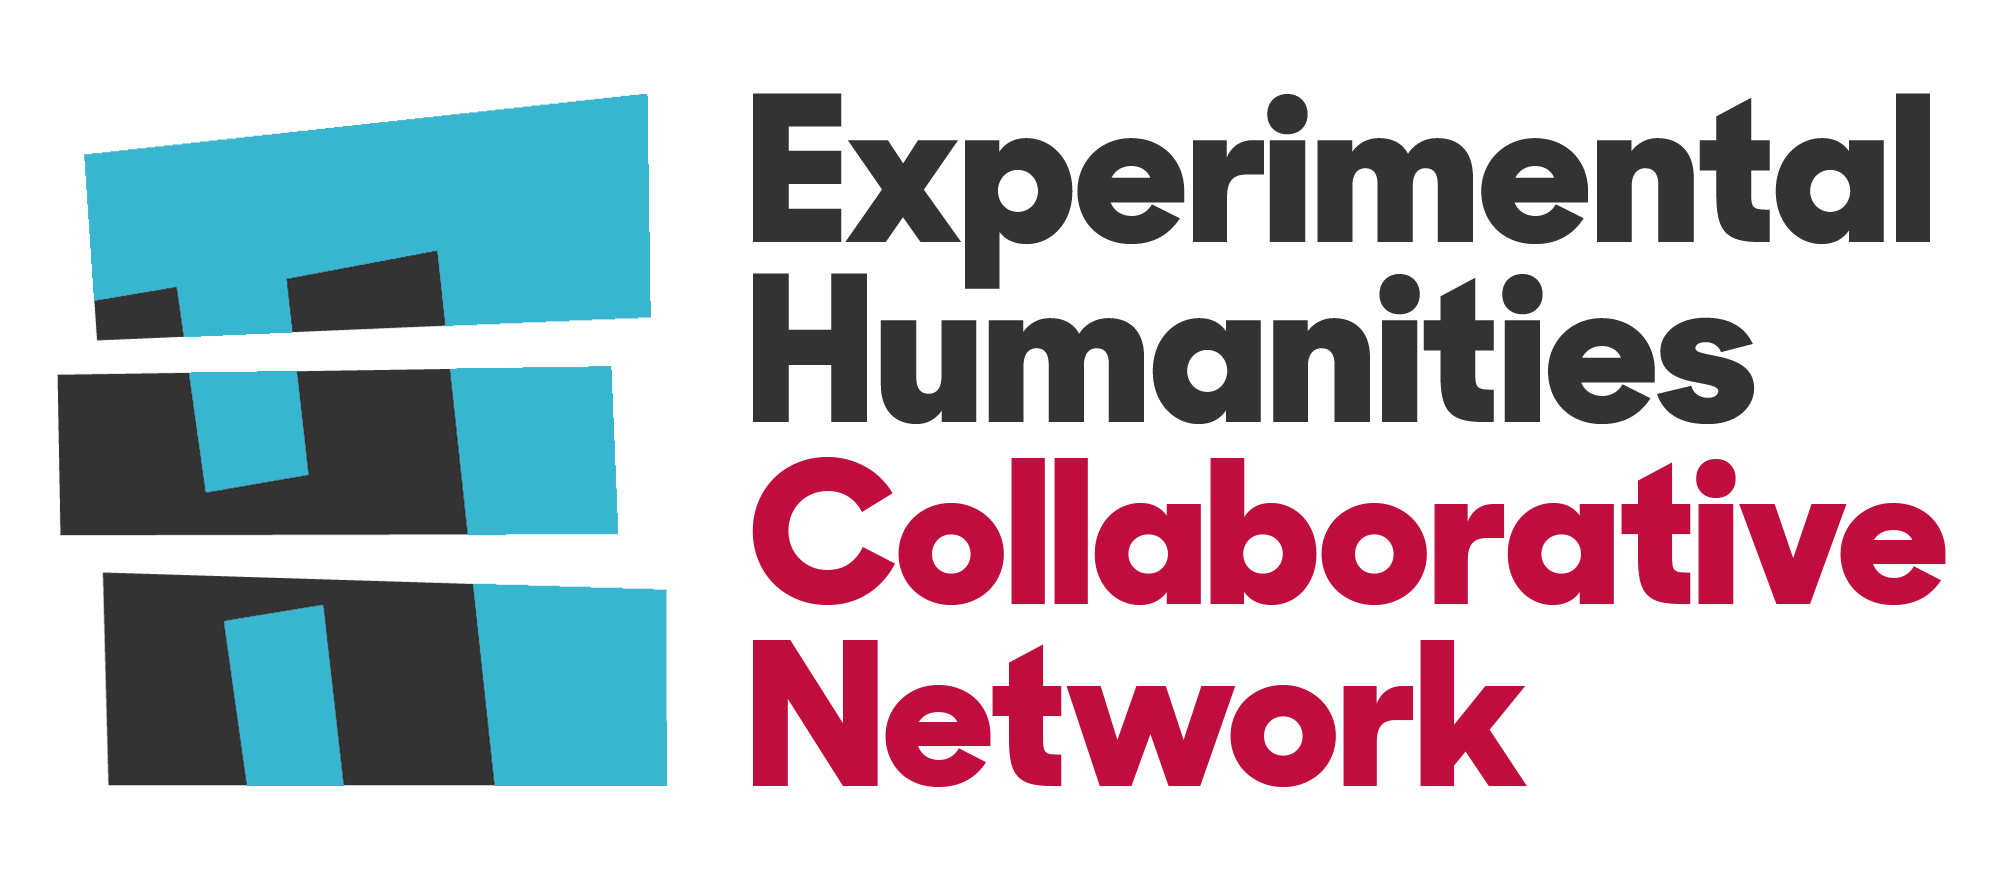 EHCN's logo which has an abstracted 'E' with a grey 'H' inside of it. Alongside this, is the text Experimental Humanities Collaborative Network.